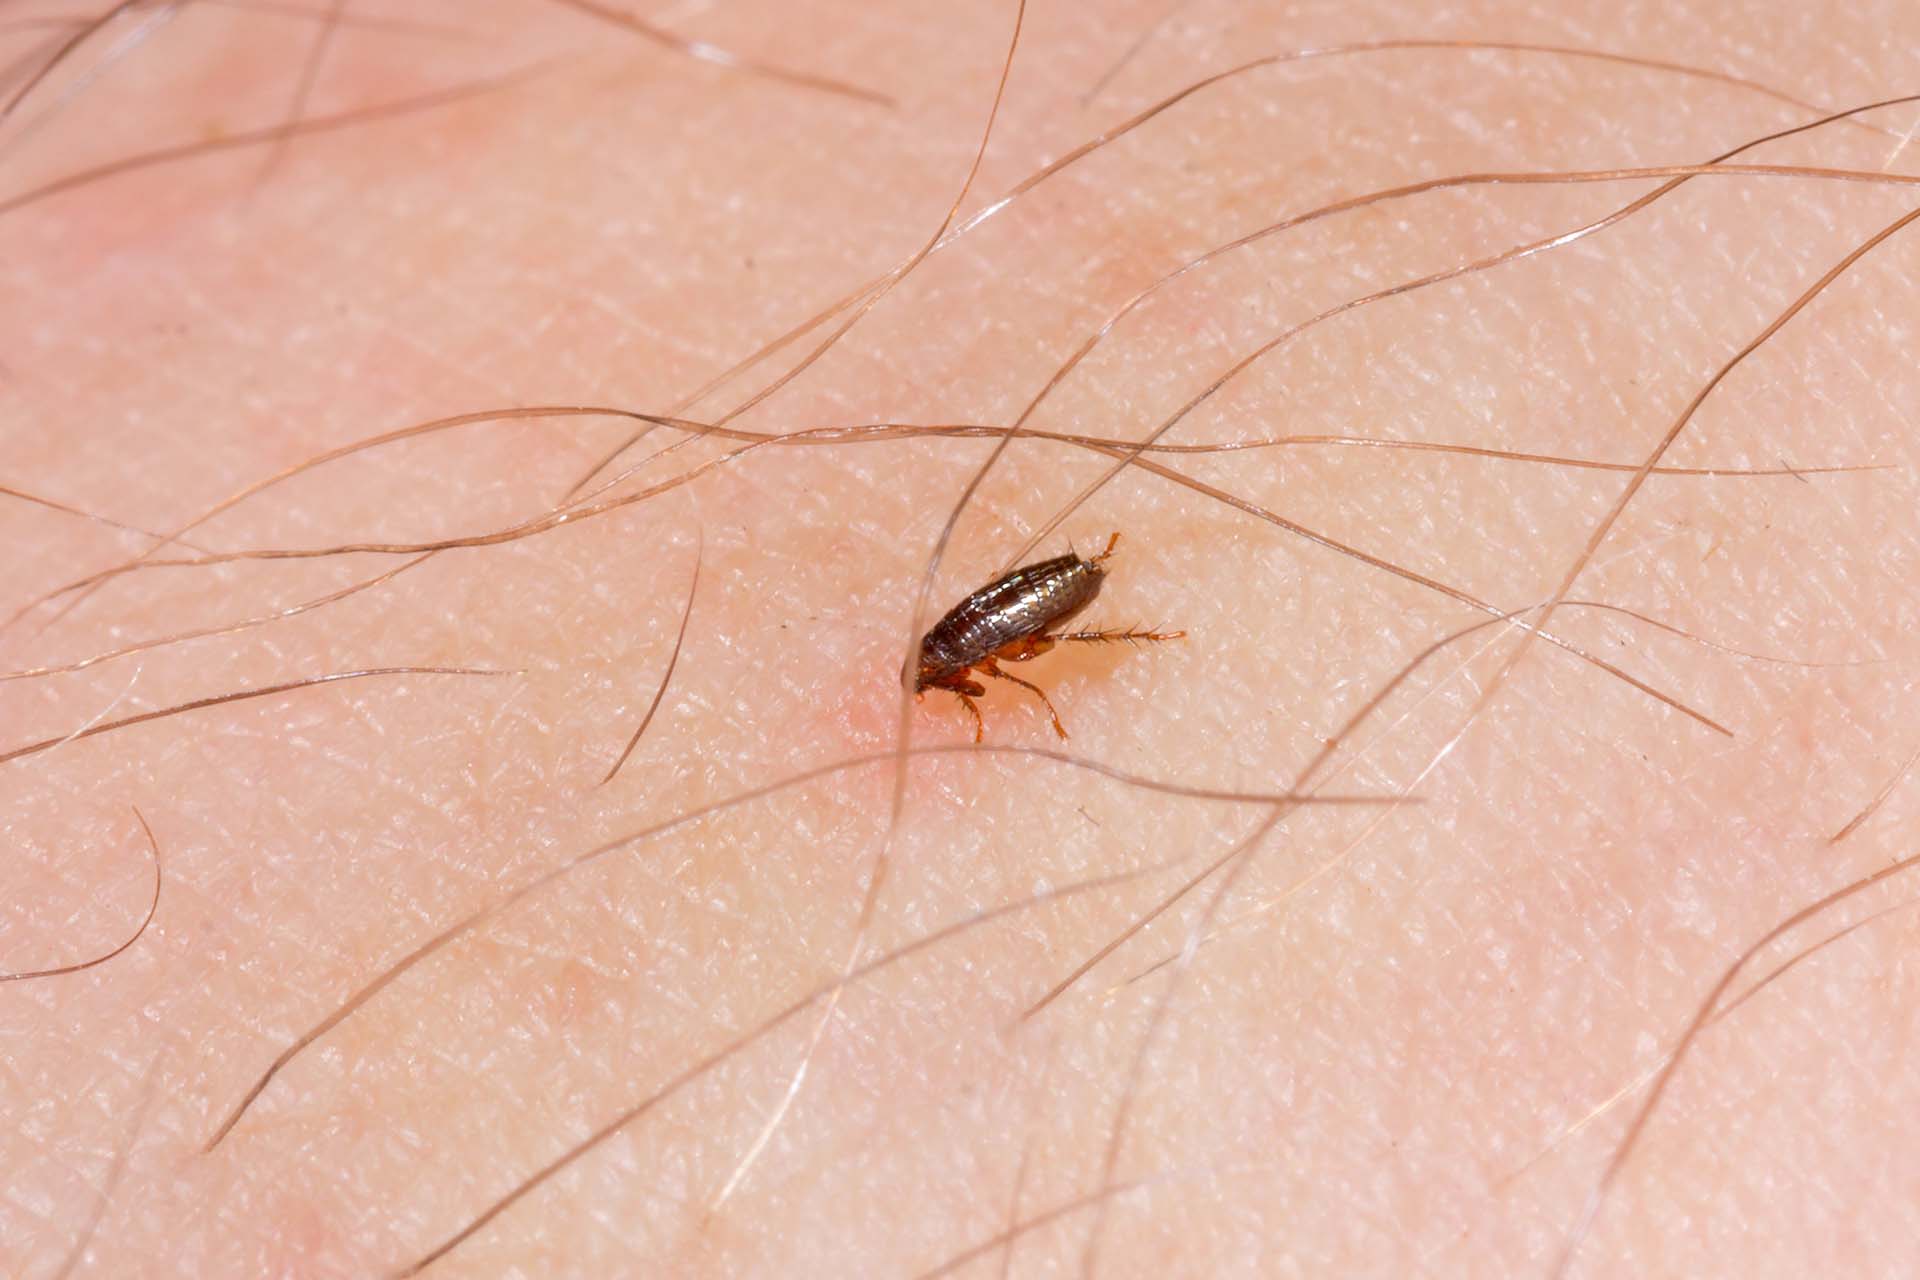 Flea Control - Picture of a flea on human skin, showing red skin and hair